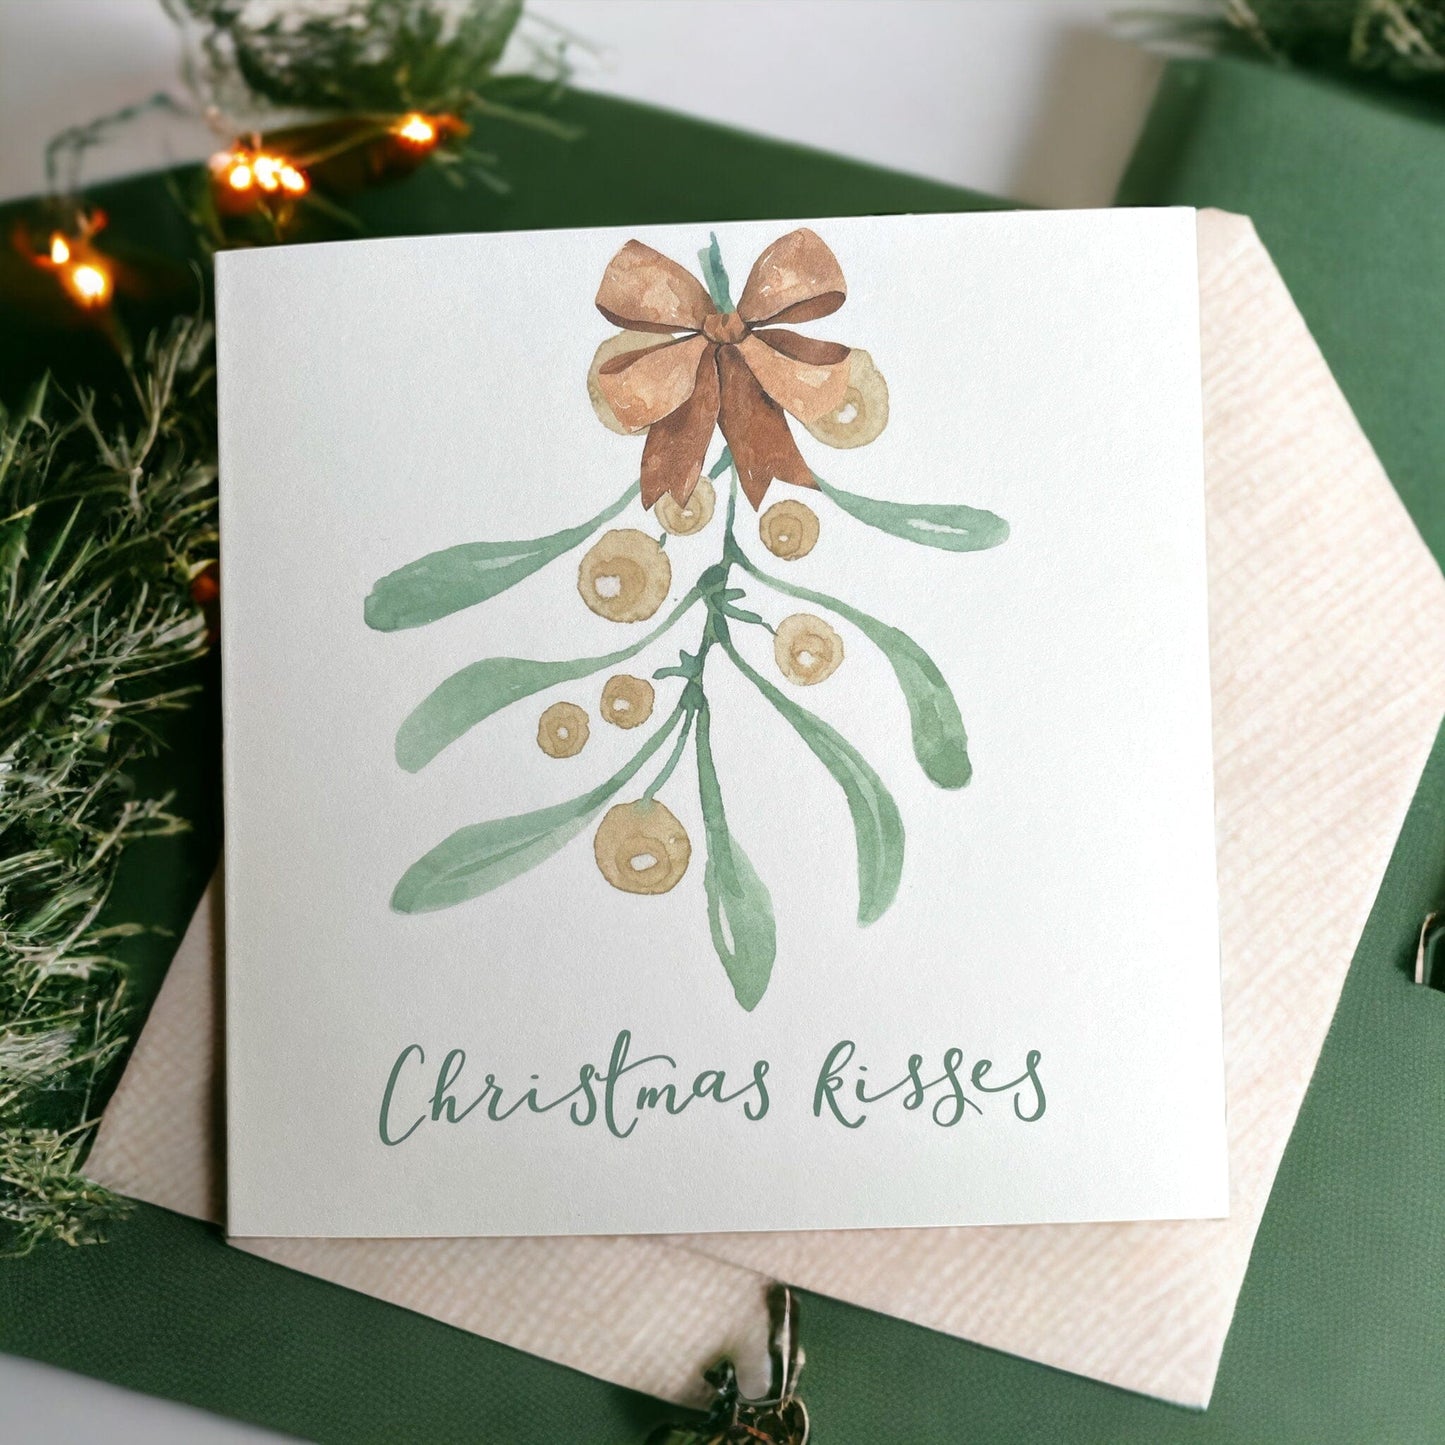 And Hope Designs Cards Christmas Kisses card